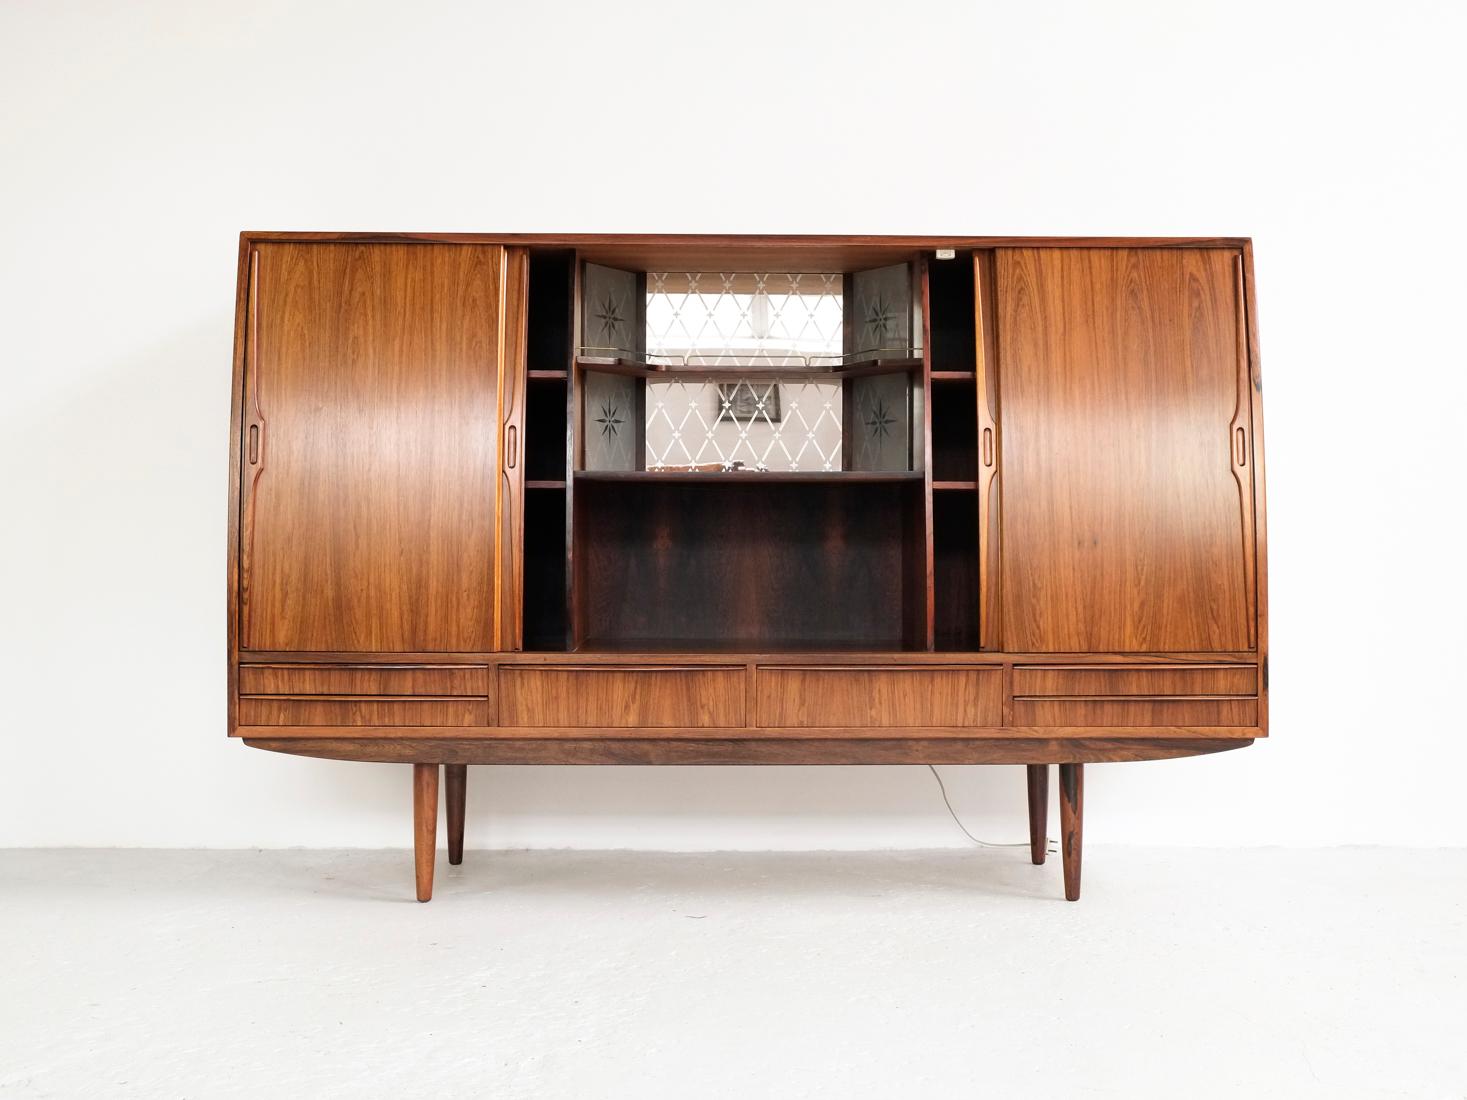 Midcentury highboard in rosewood made in Denmark in the 1960s. A true top quality piece with a nicely curved front, including the doors. Inside there is a very detailed bar closet in the middle compartment with light behind the glass. This highboard